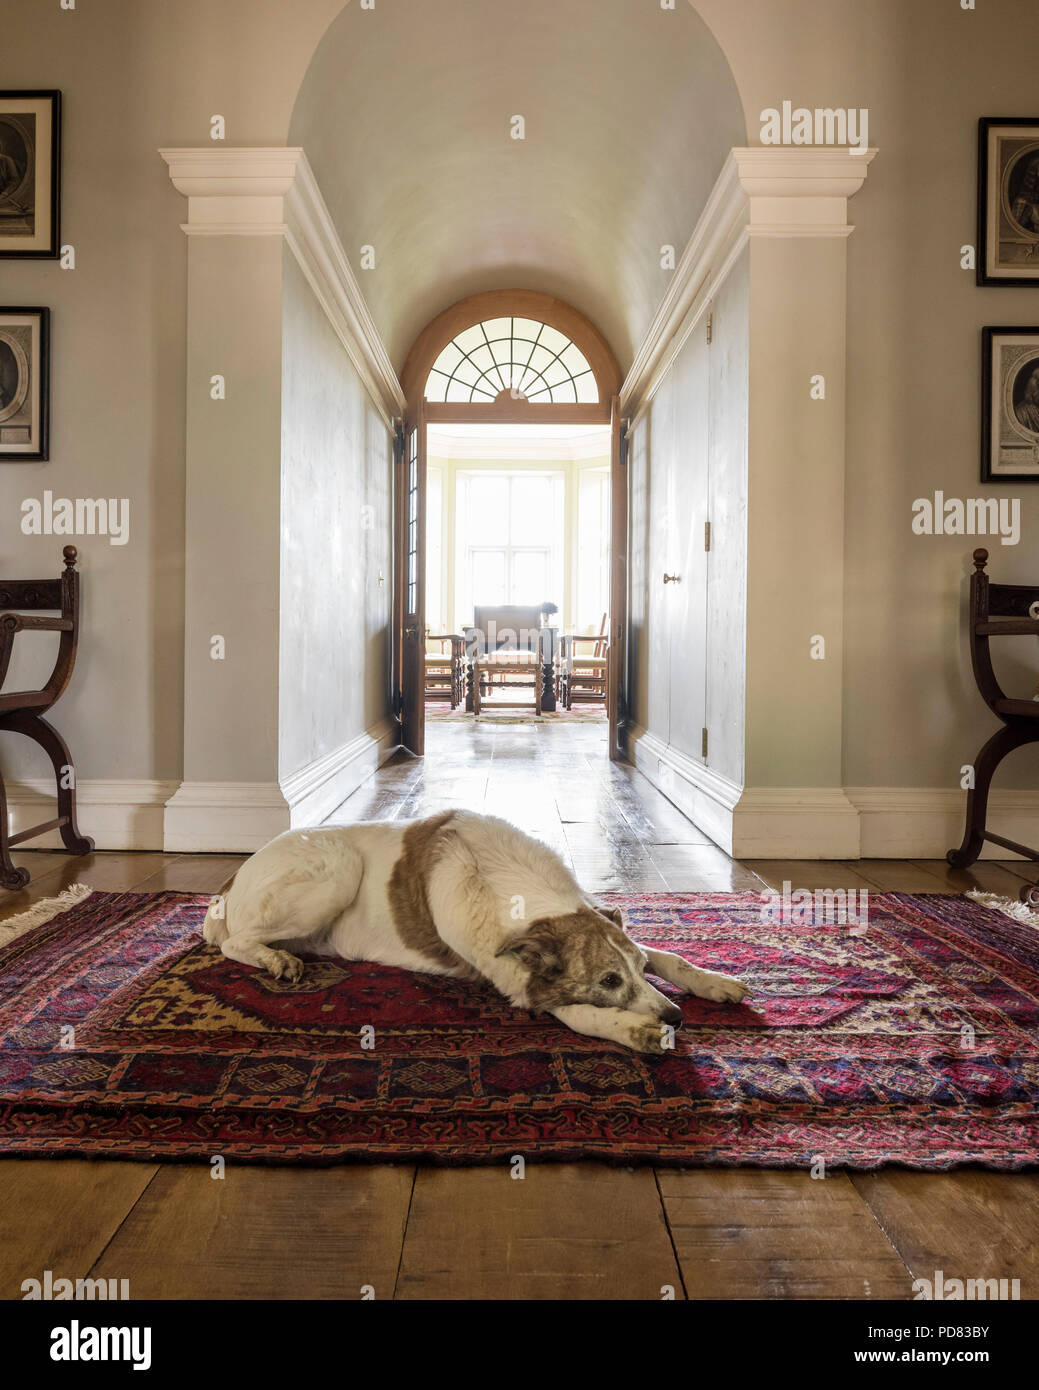 A dog lies on an antique rug in hall leading through to dining room with double doors Stock Photo